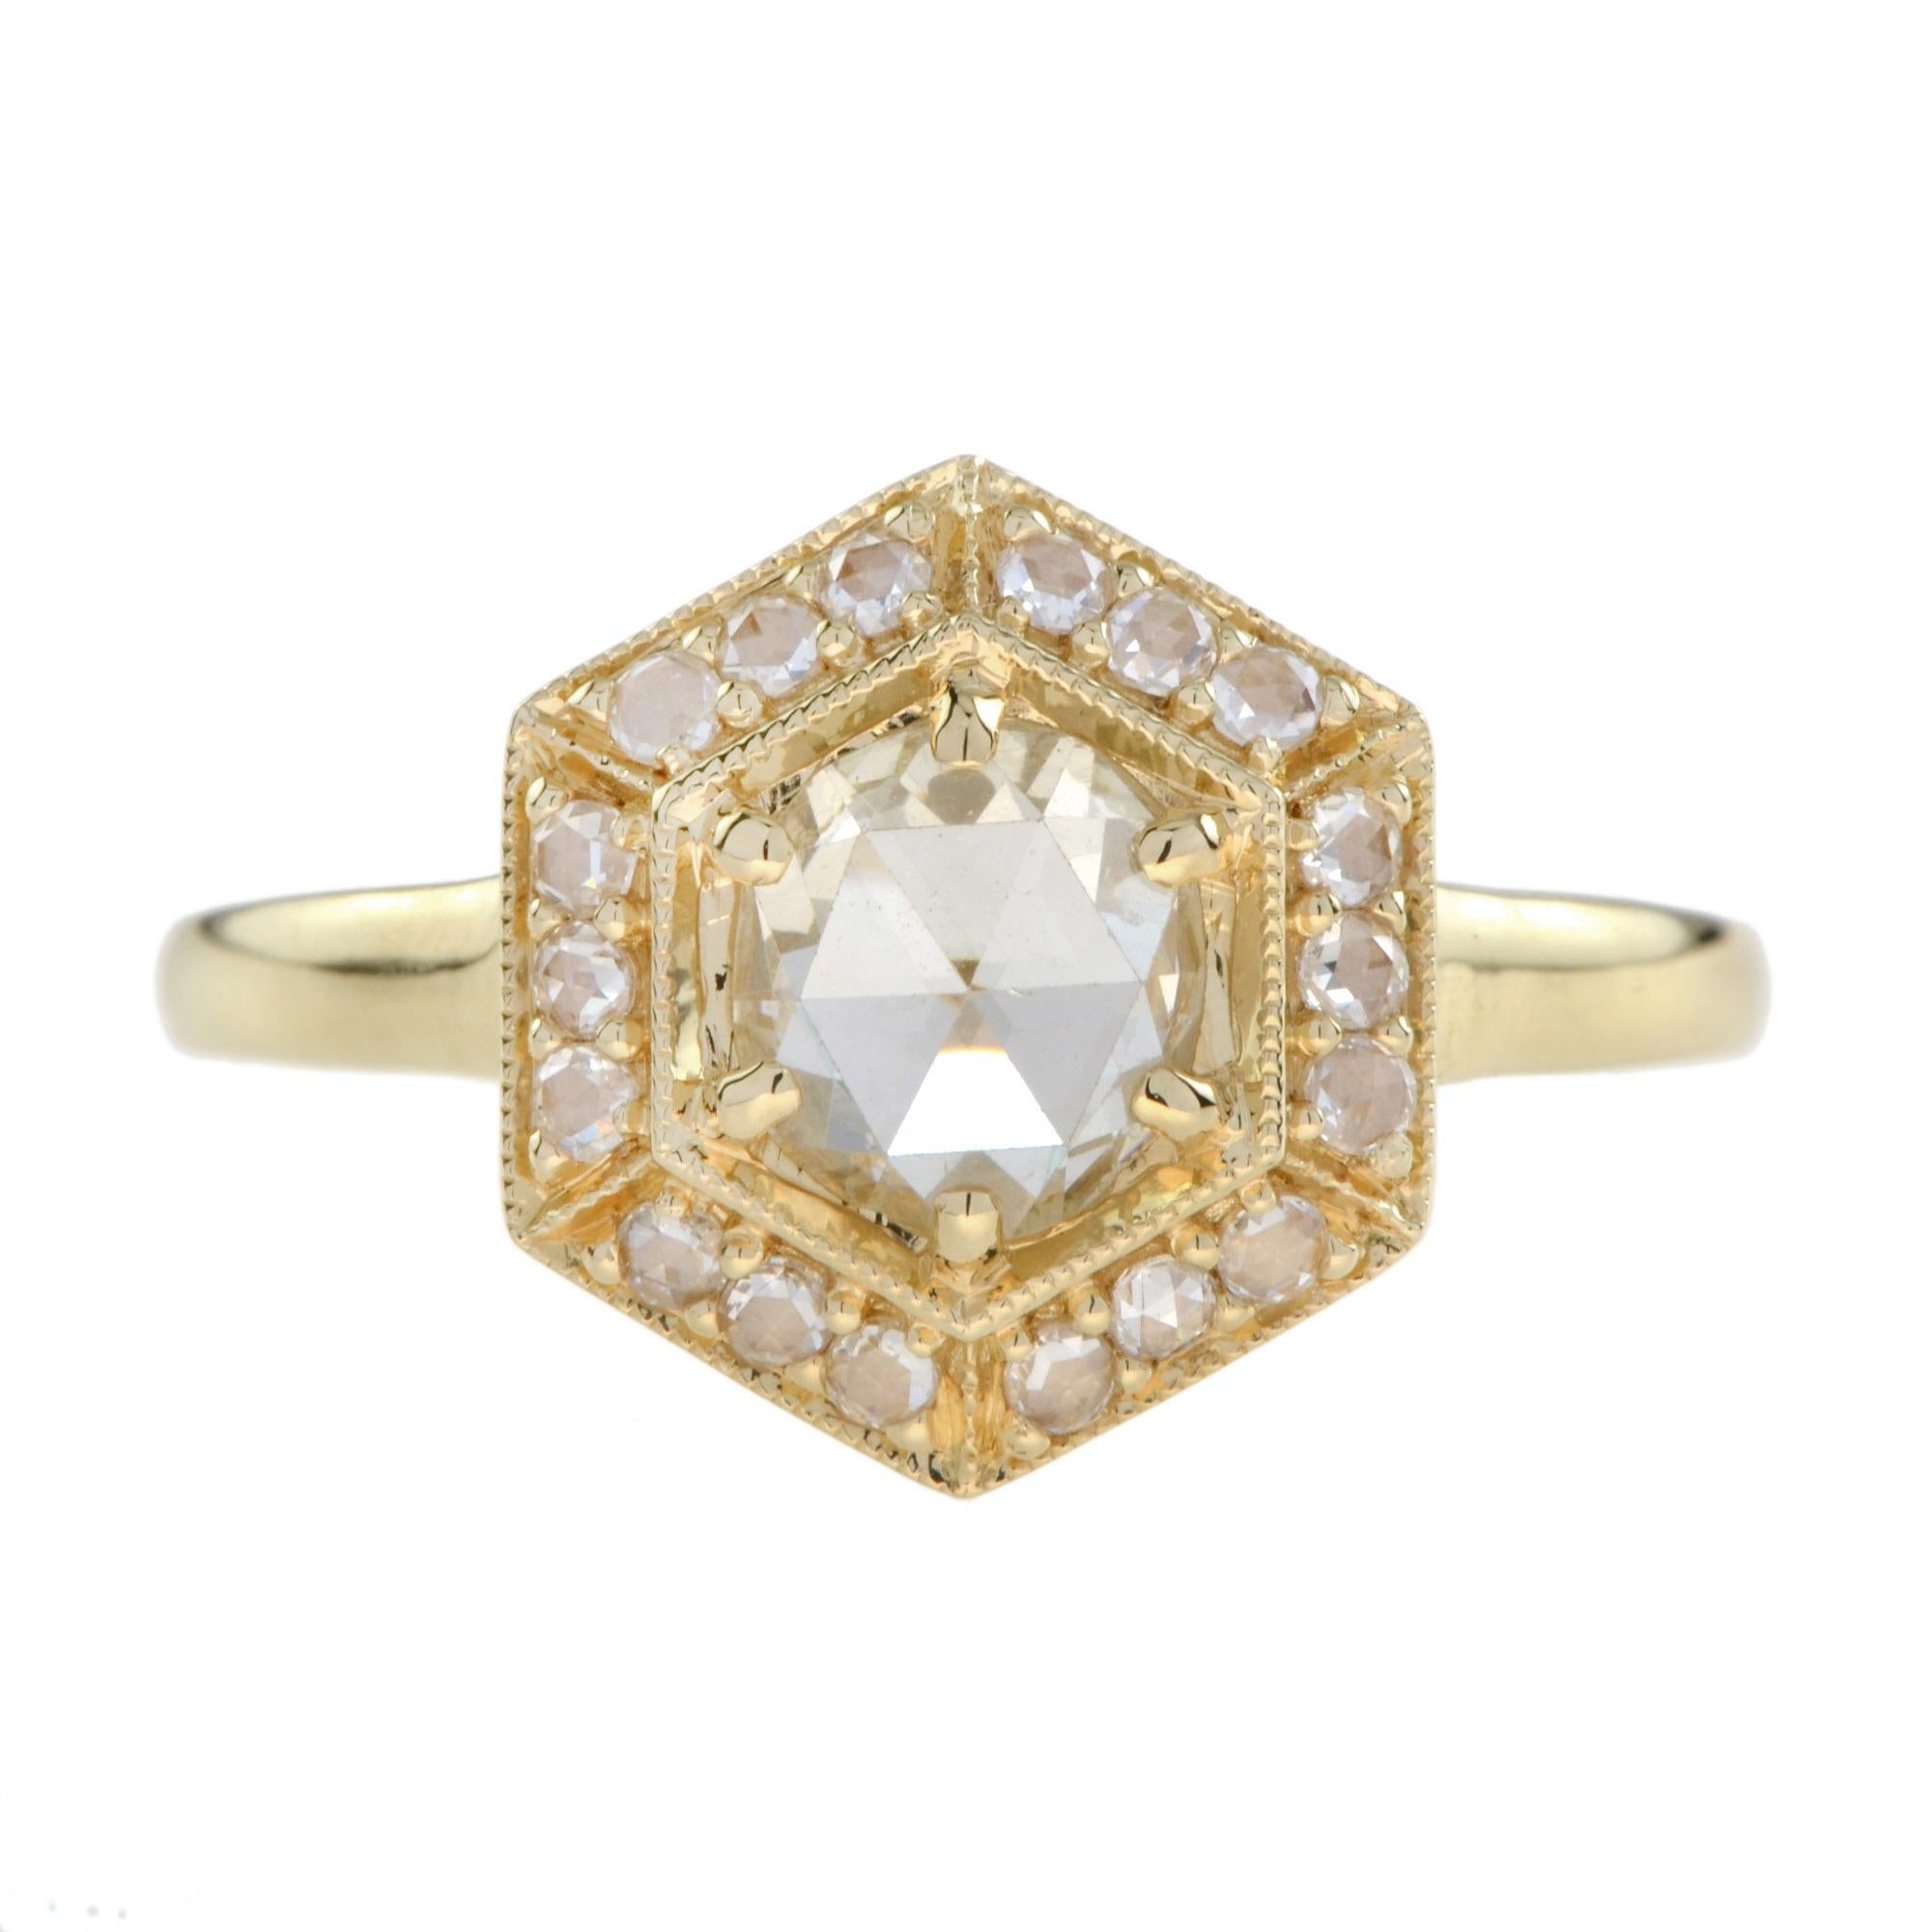 Vintage influence meets a modern, edgy design in this hexagon halo unique engagement ring. Set in a yellow gold , a 0.68 carats rose cut diamond is highlighted within a diamond set hexagonal frame that is raised to allow for seamless stacking.